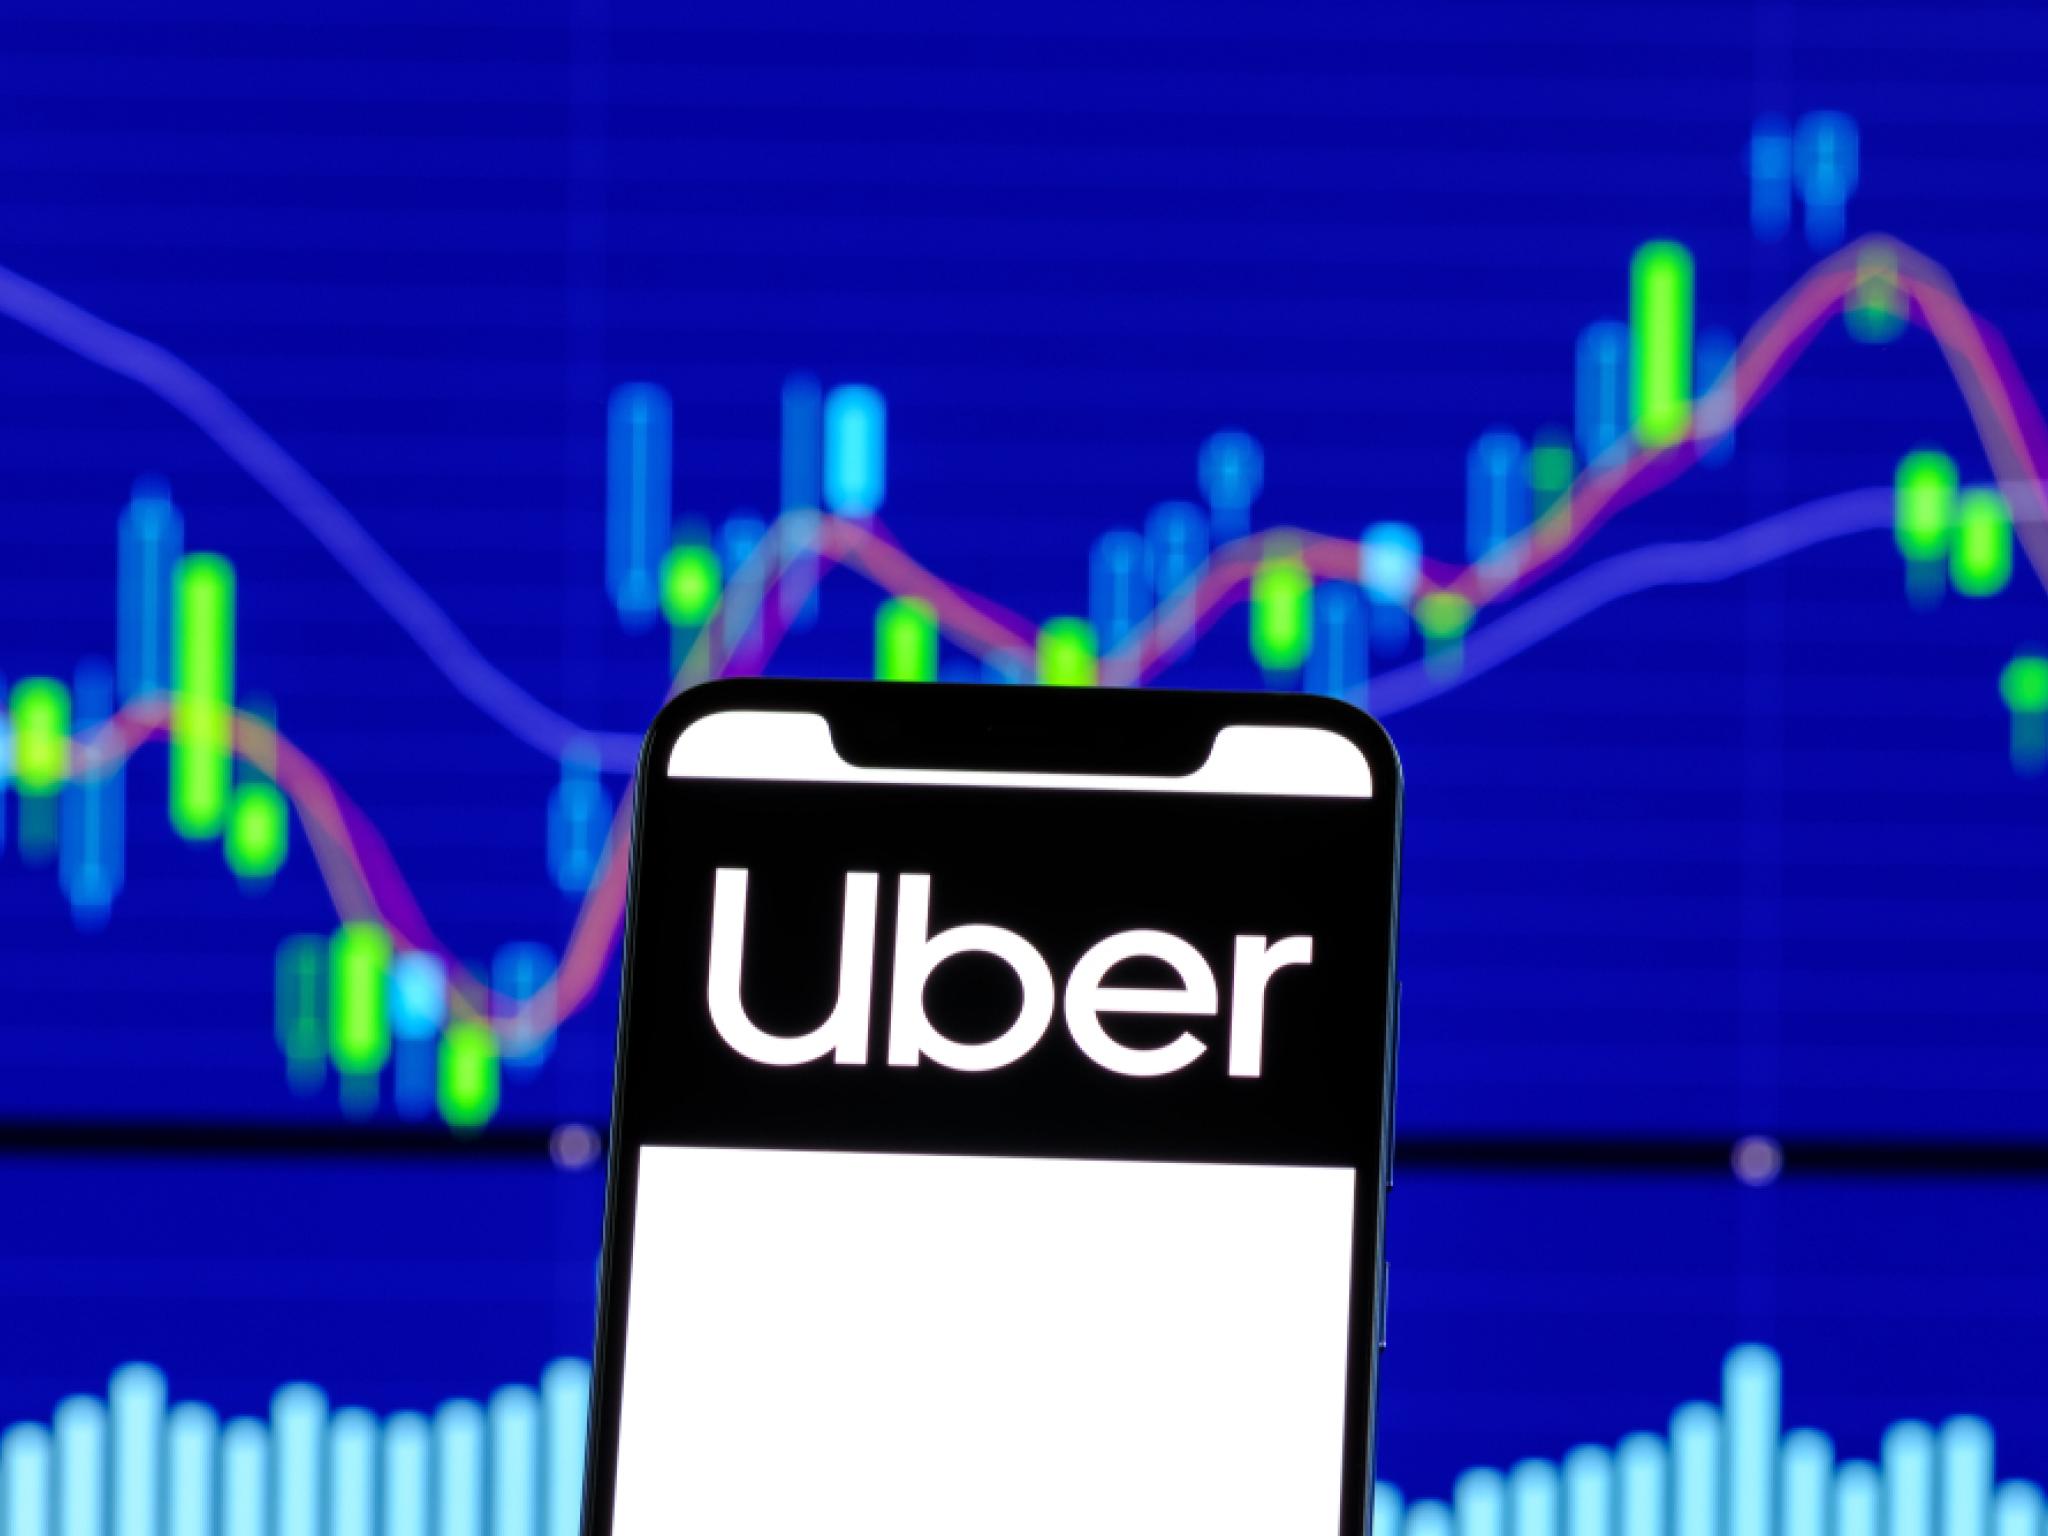  uber-stock-dips-9-after-q1-earnings-jpmorgan-analyst-says-pullback-overdone 